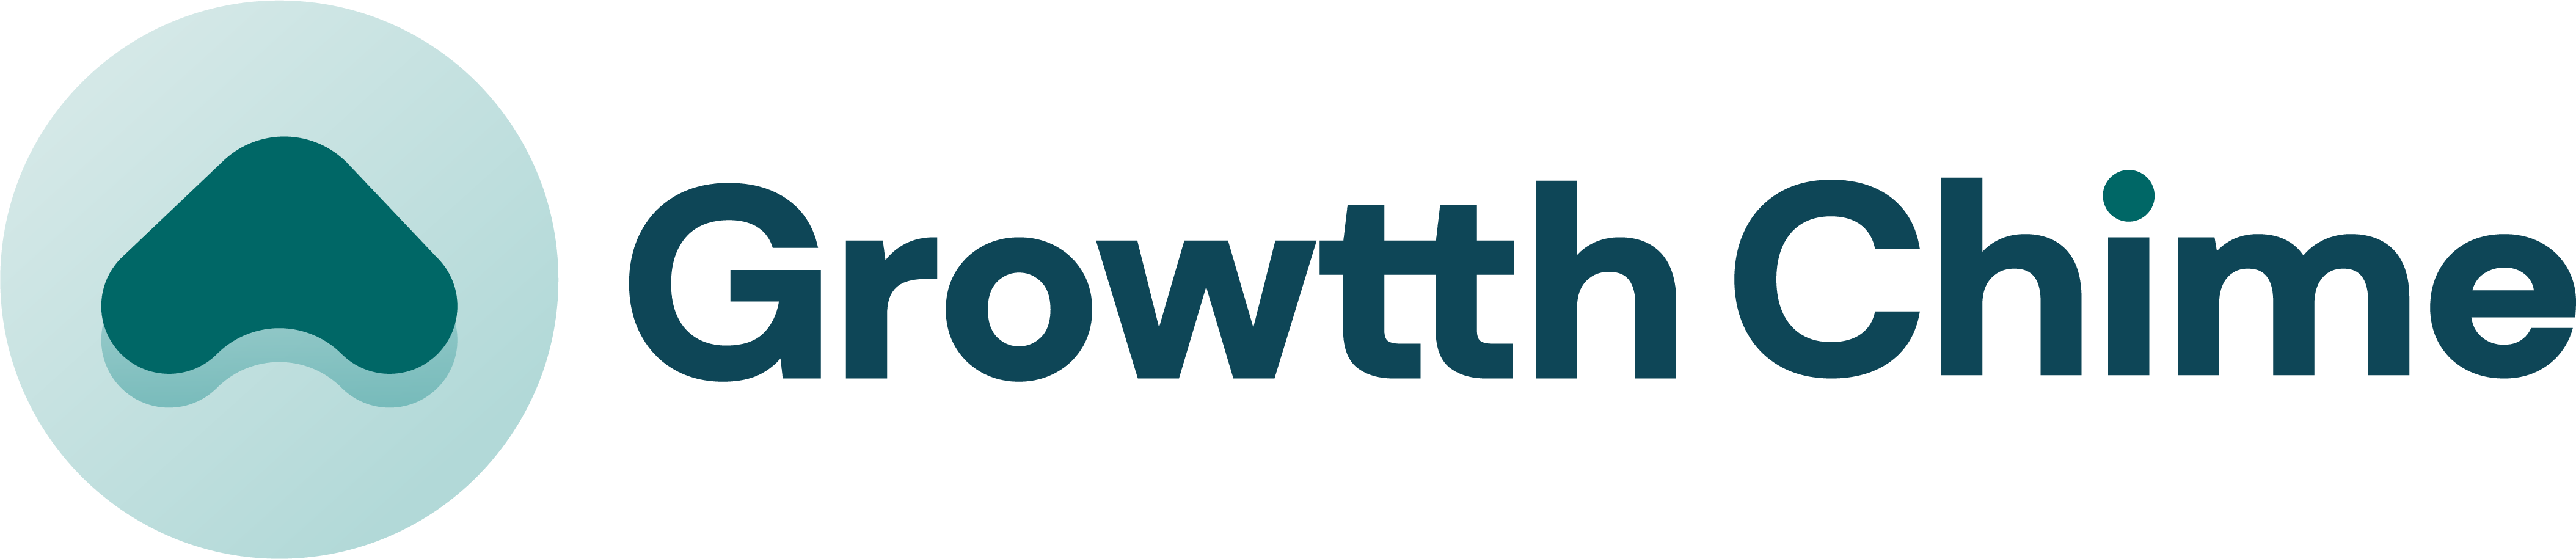 Growtth Chime Logo